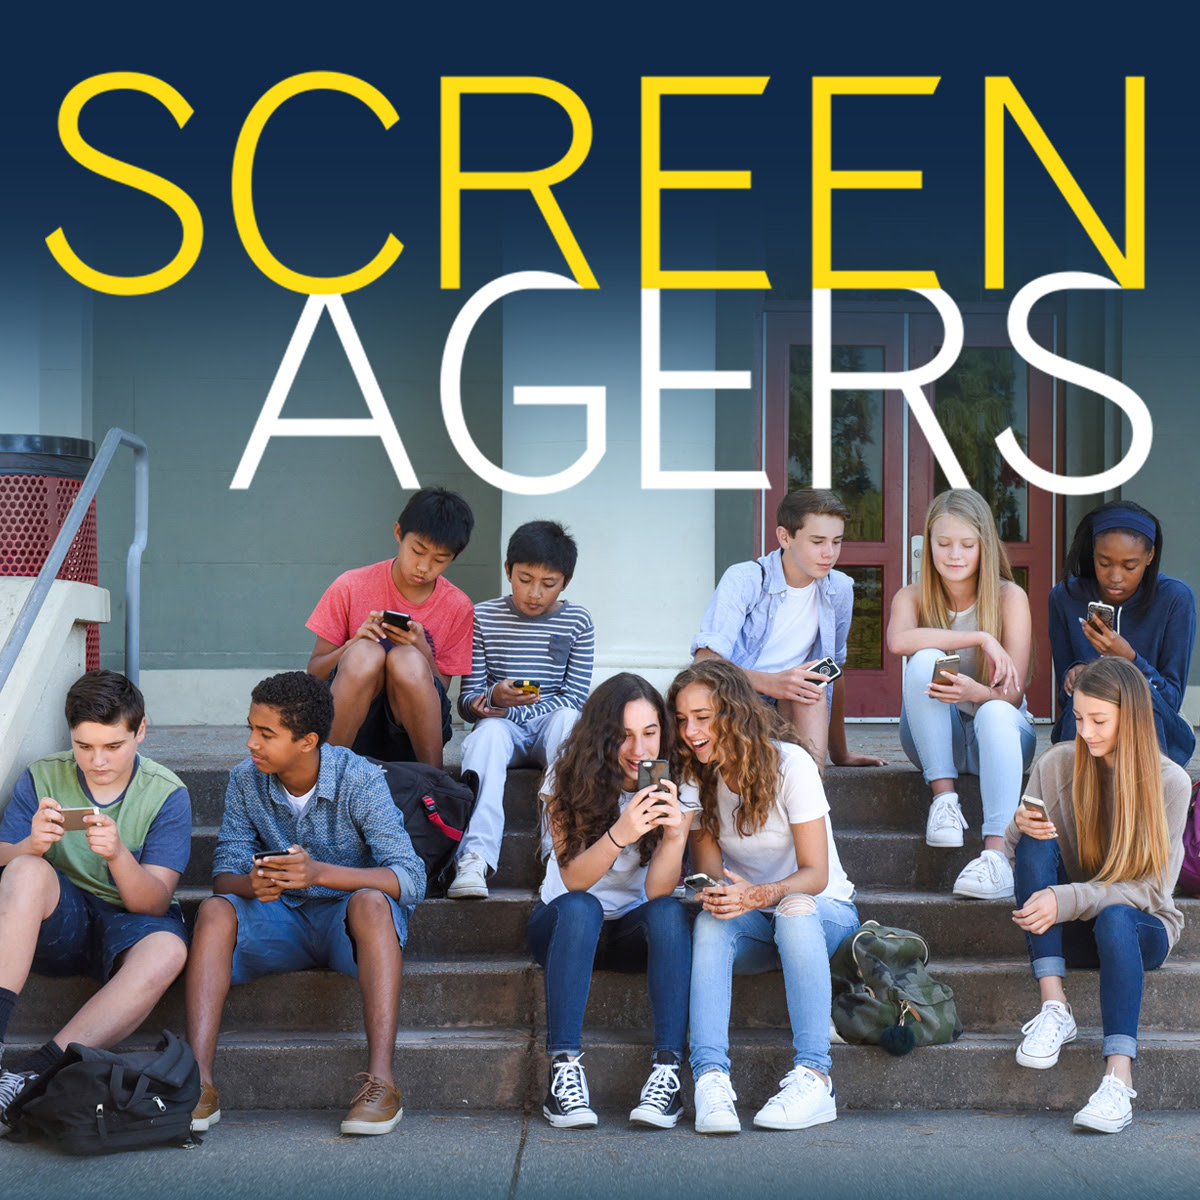 Screenagers Film Presented By Water of Life Community Church